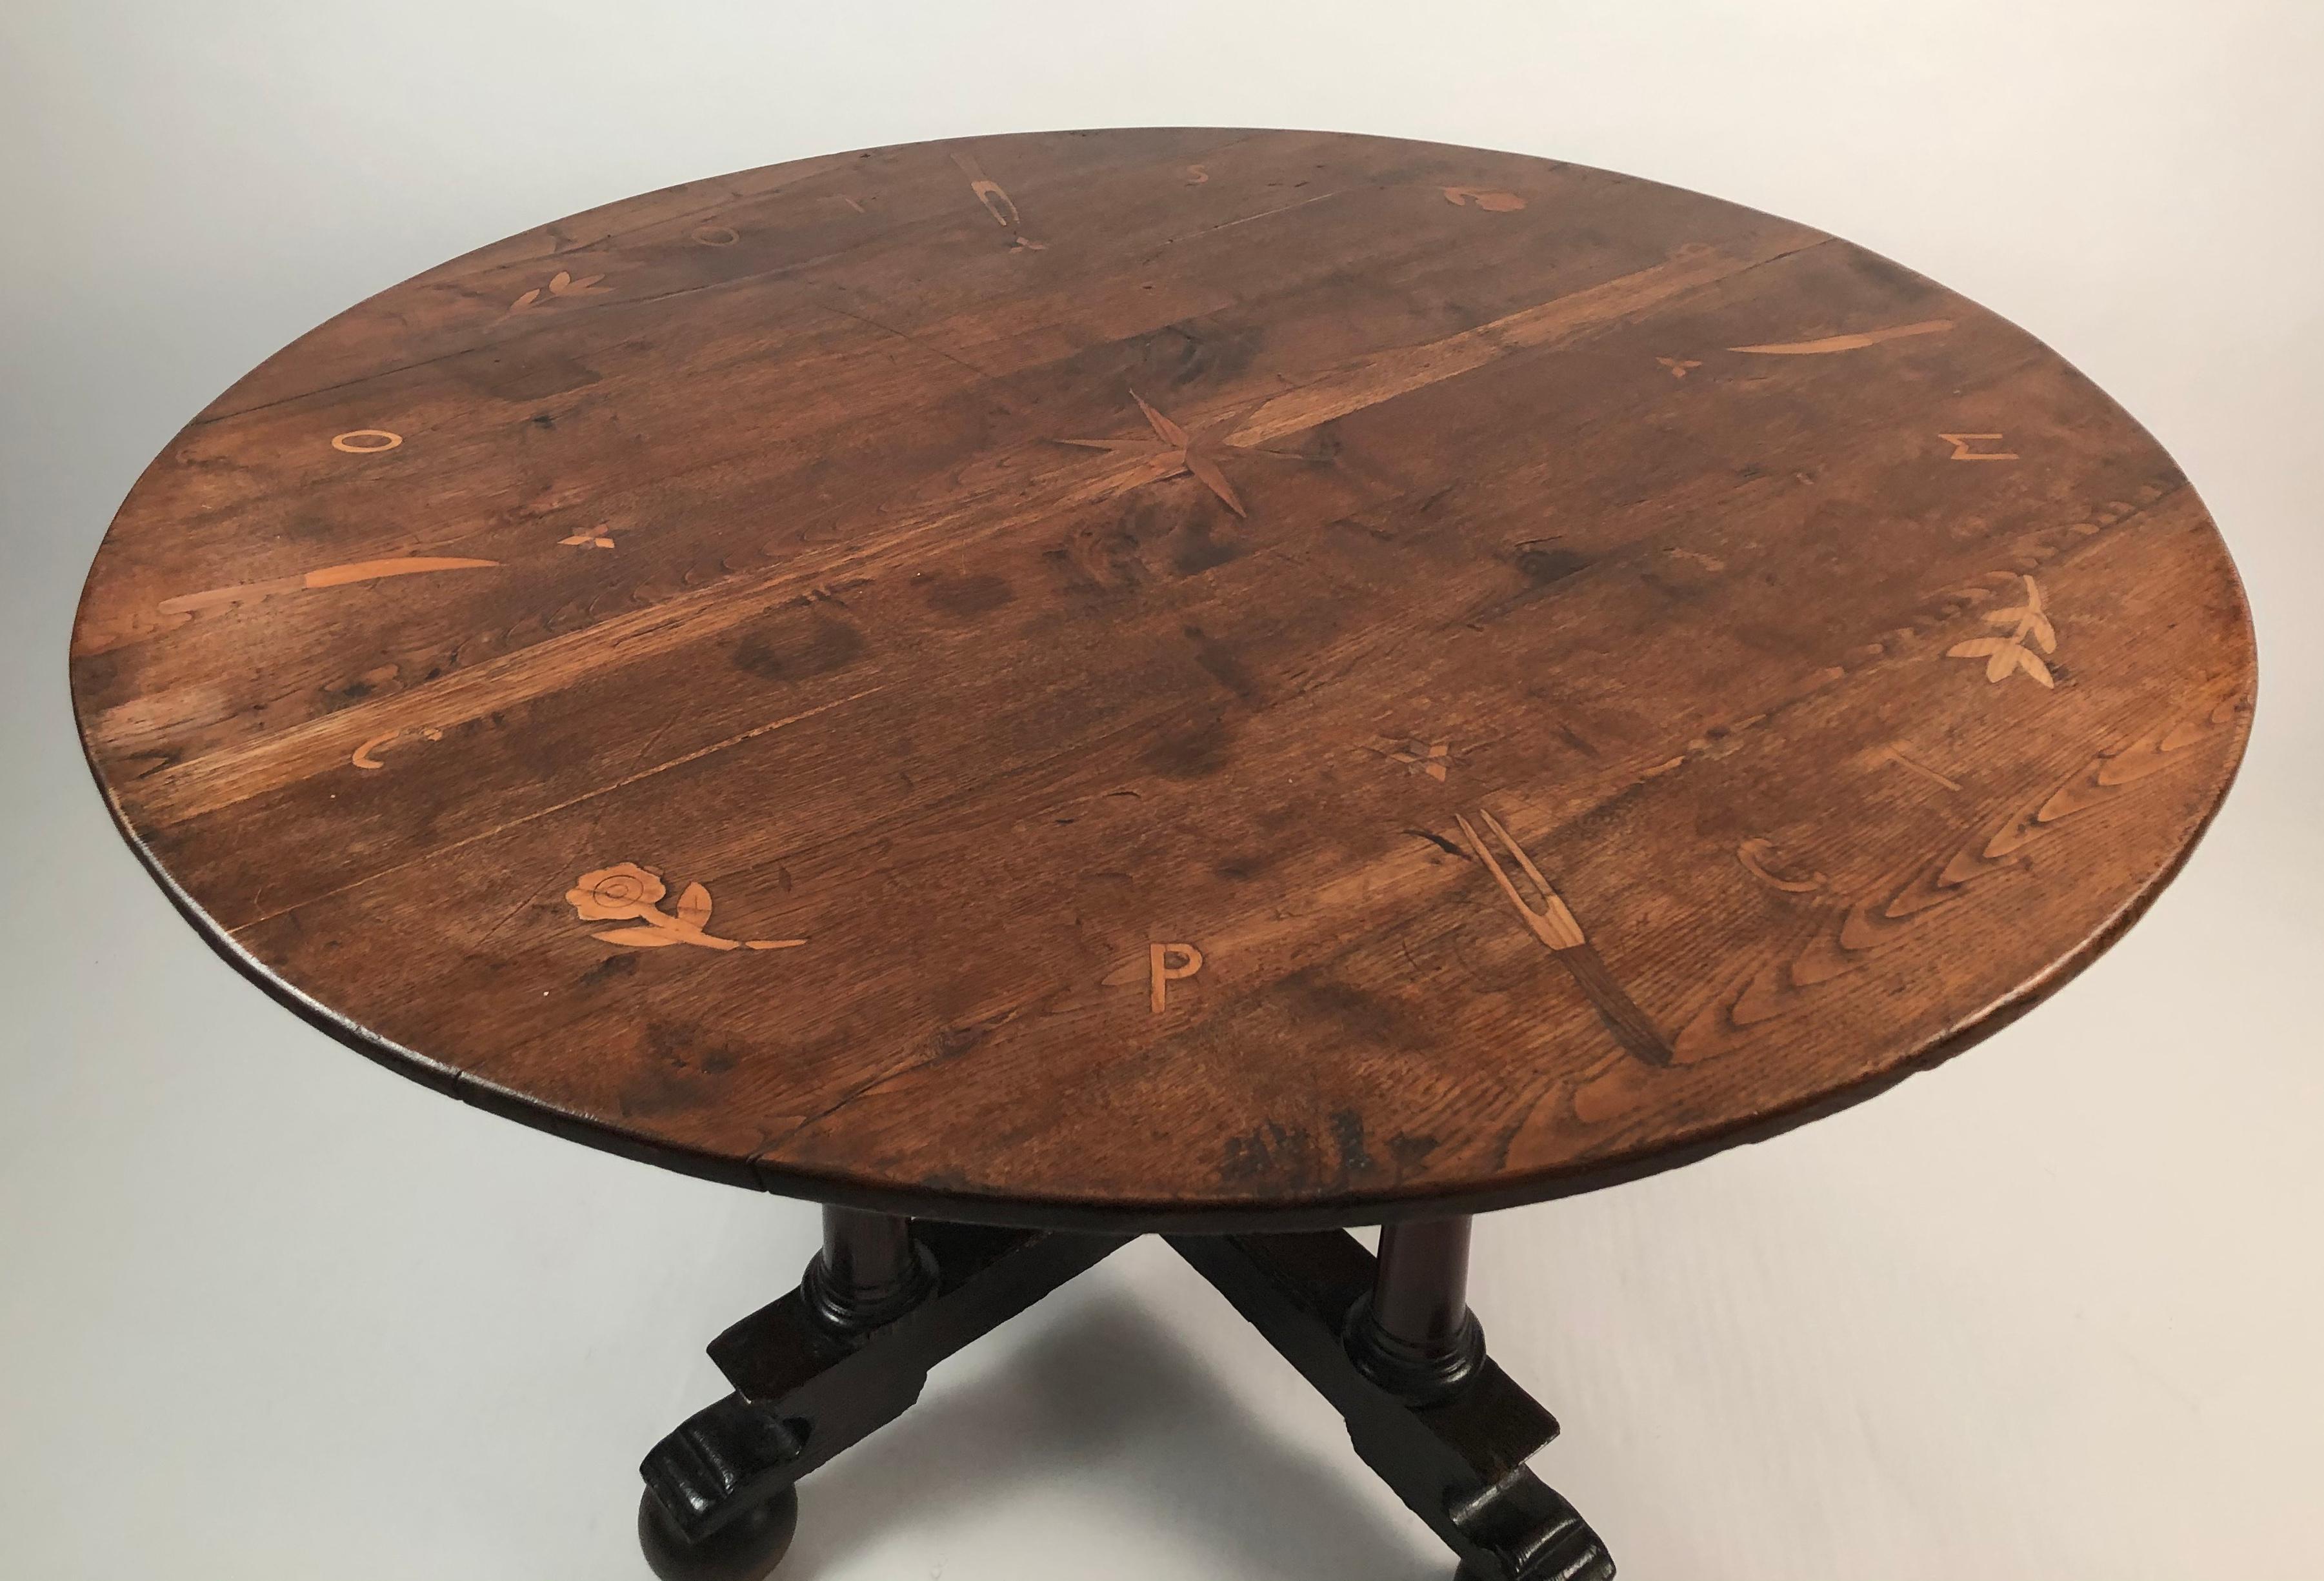 A charming and unusual circular breakfast or dining) table, with a 19th century English Country oak top inlaid with a fruitwood star in the center initials and forks and knives, representing place settings and the assigned seats, supported on a 19th